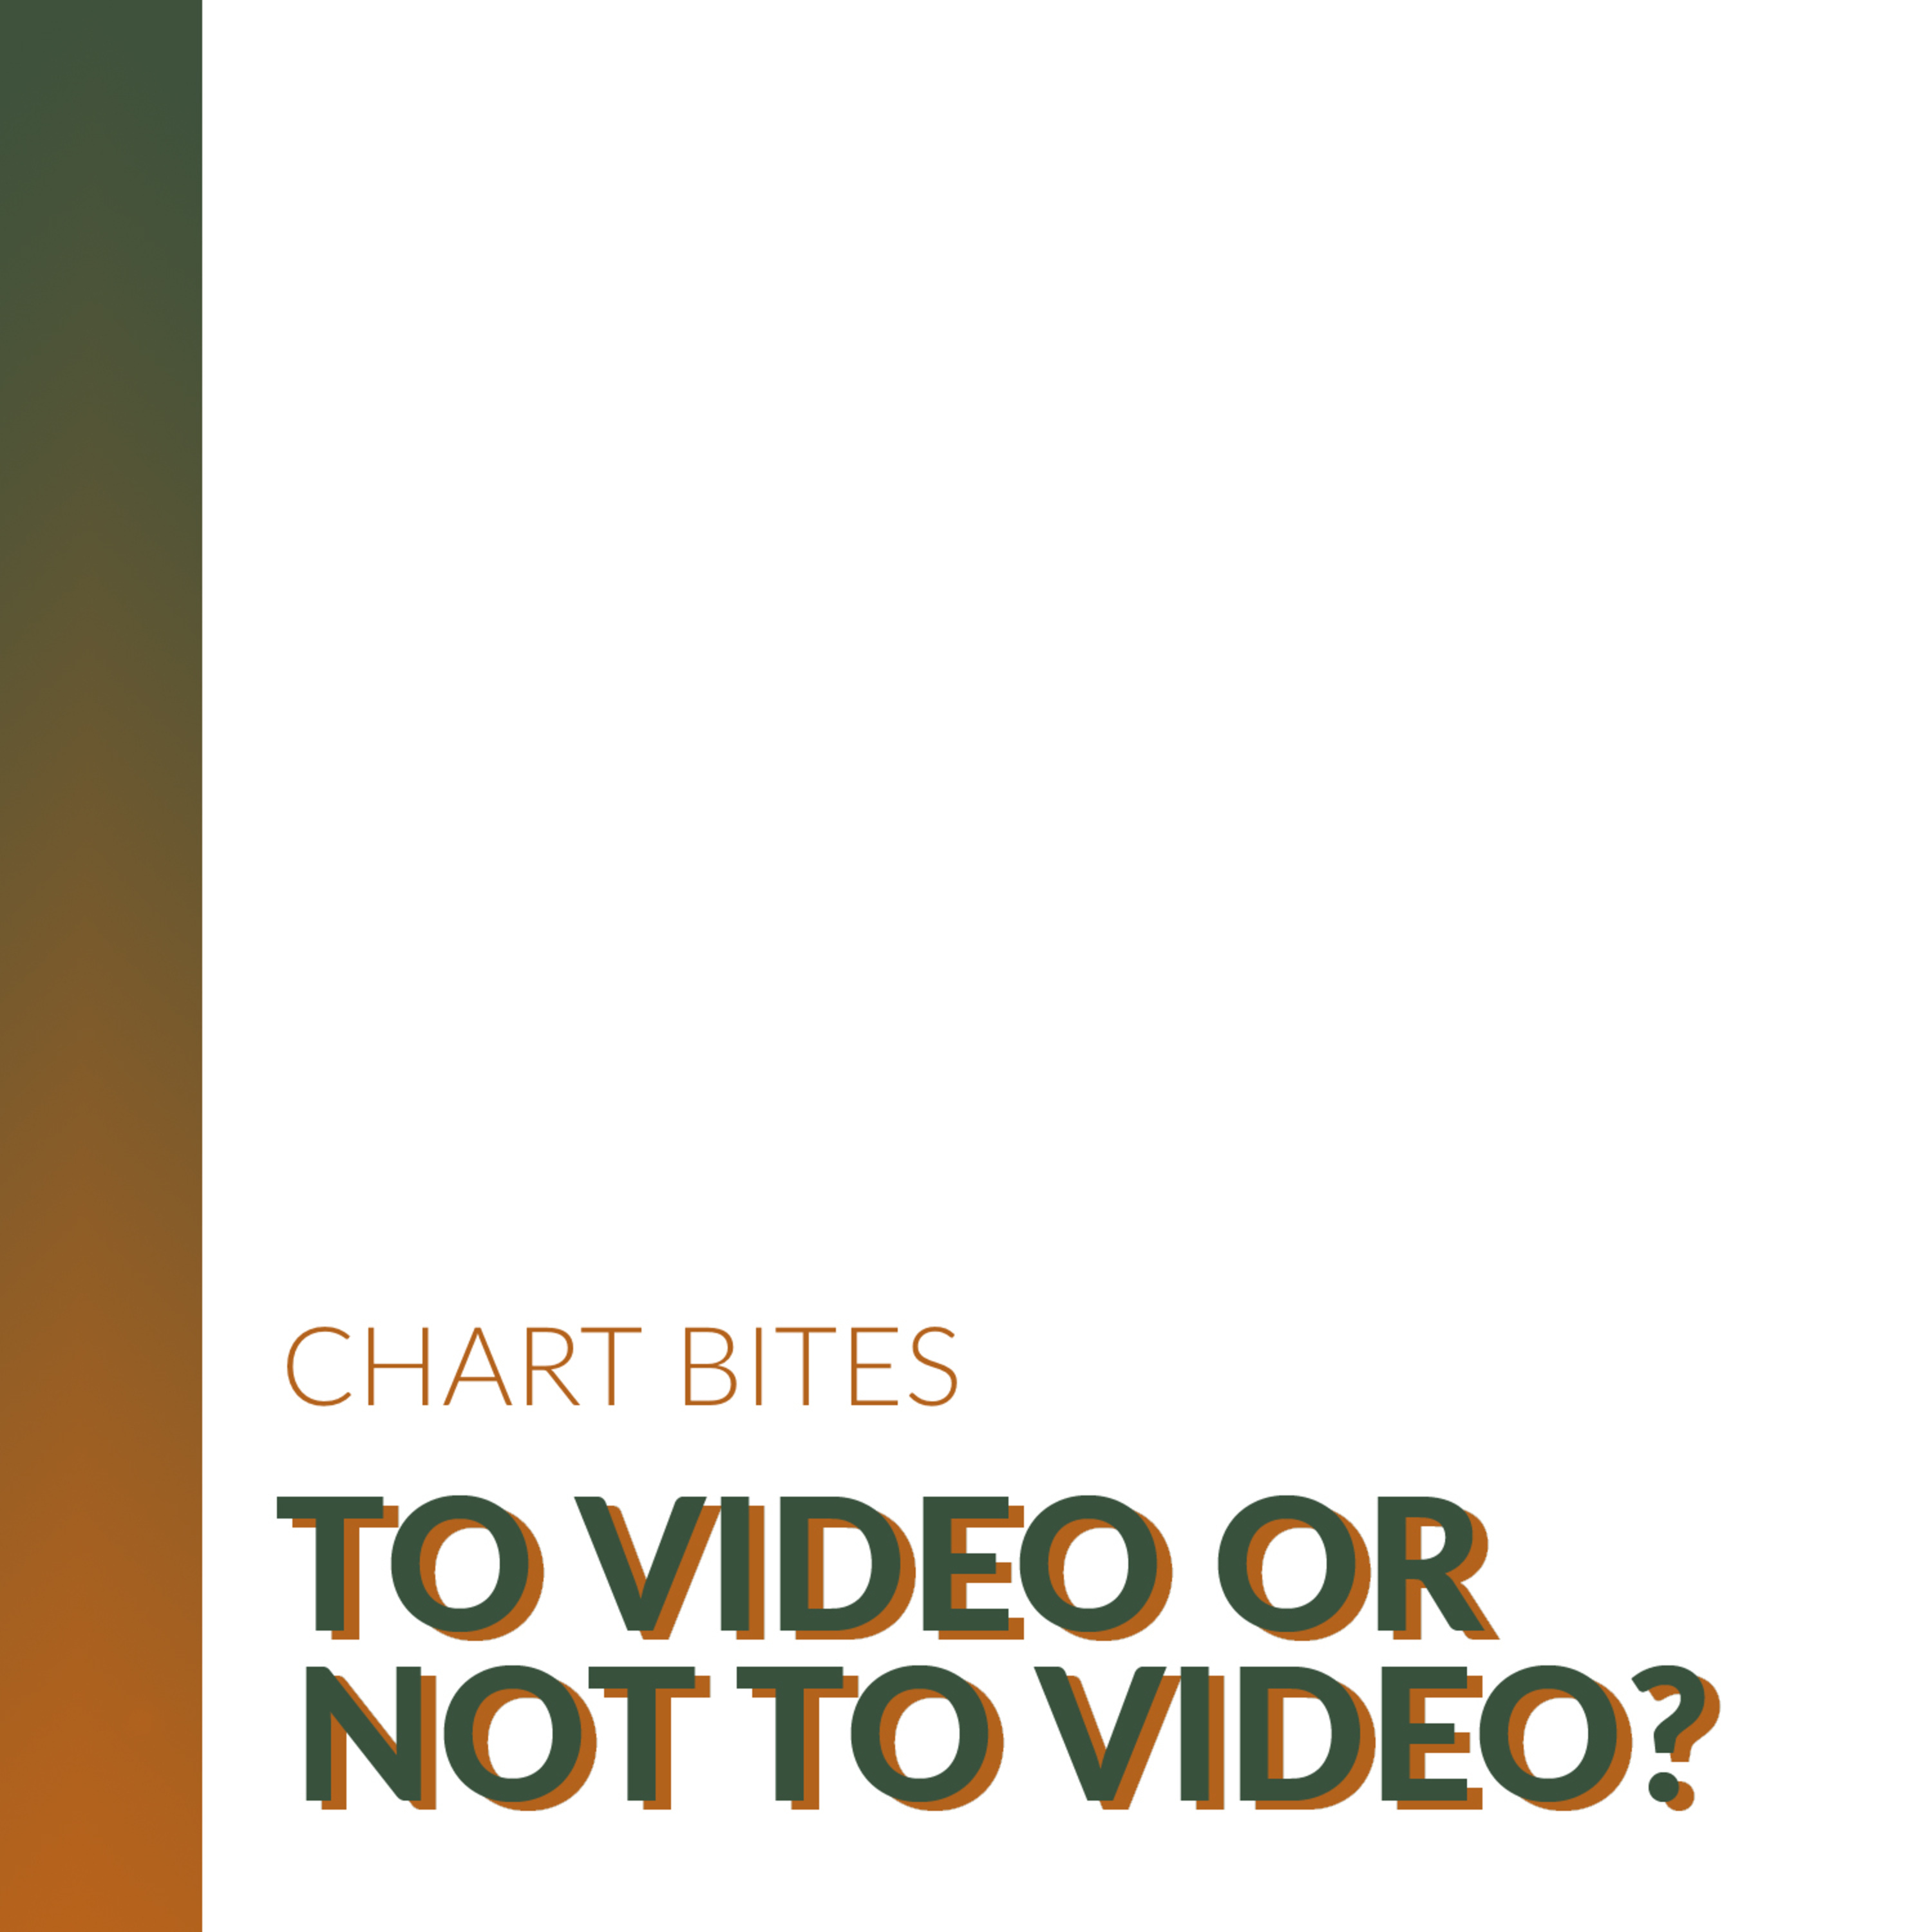 To video or not video?